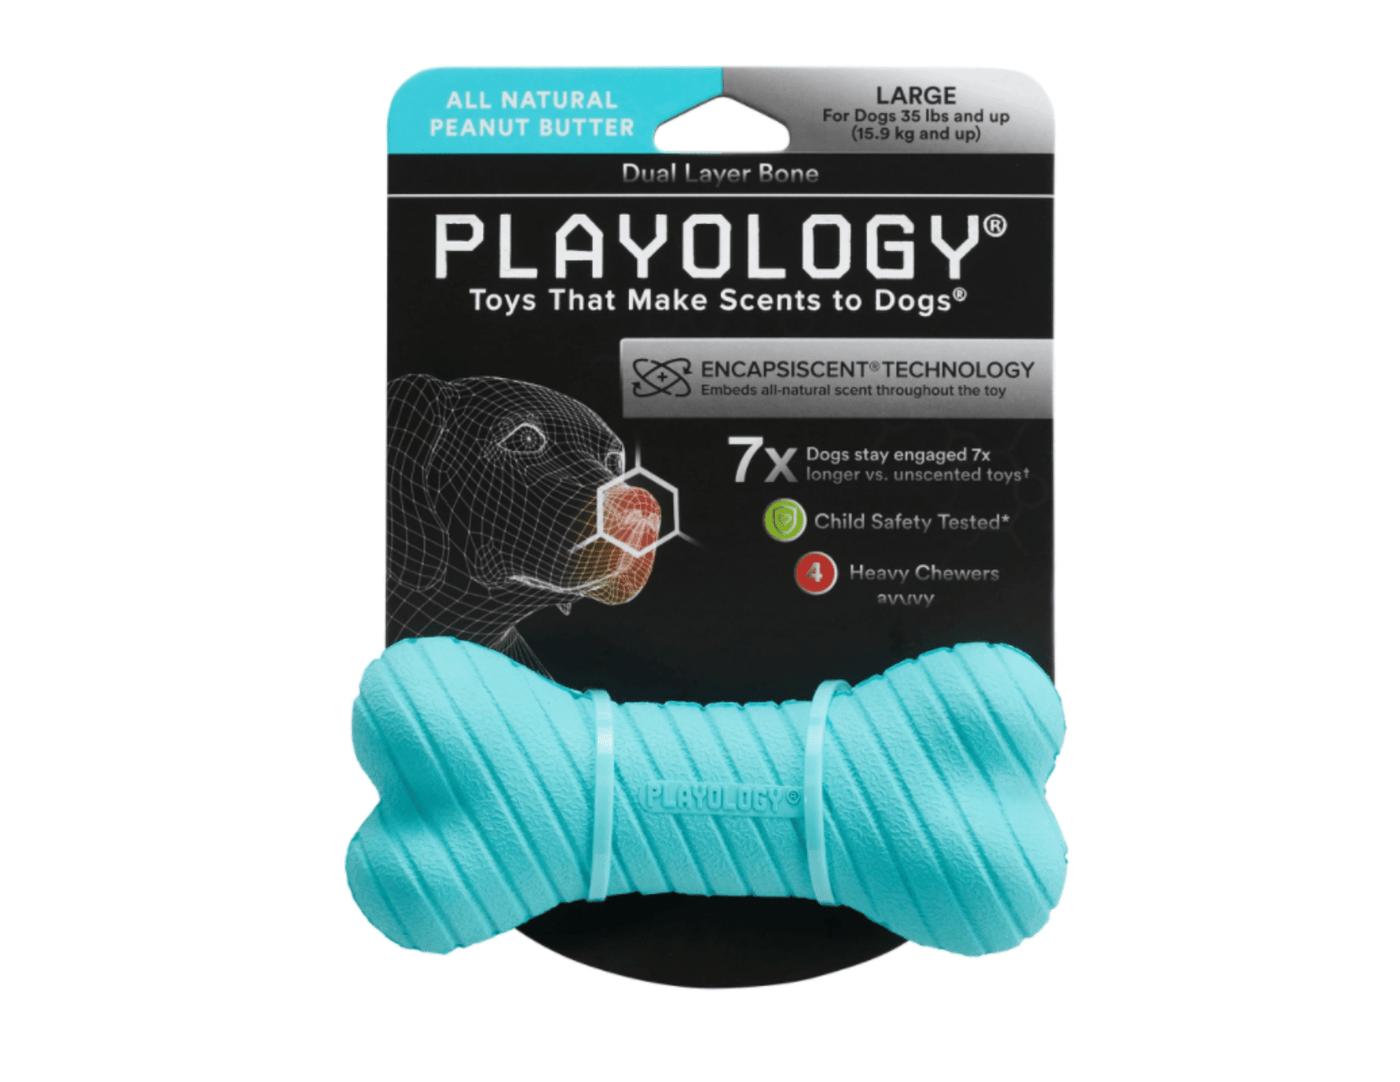 Dual Layer Bone Peanut Butter Scent - Playology